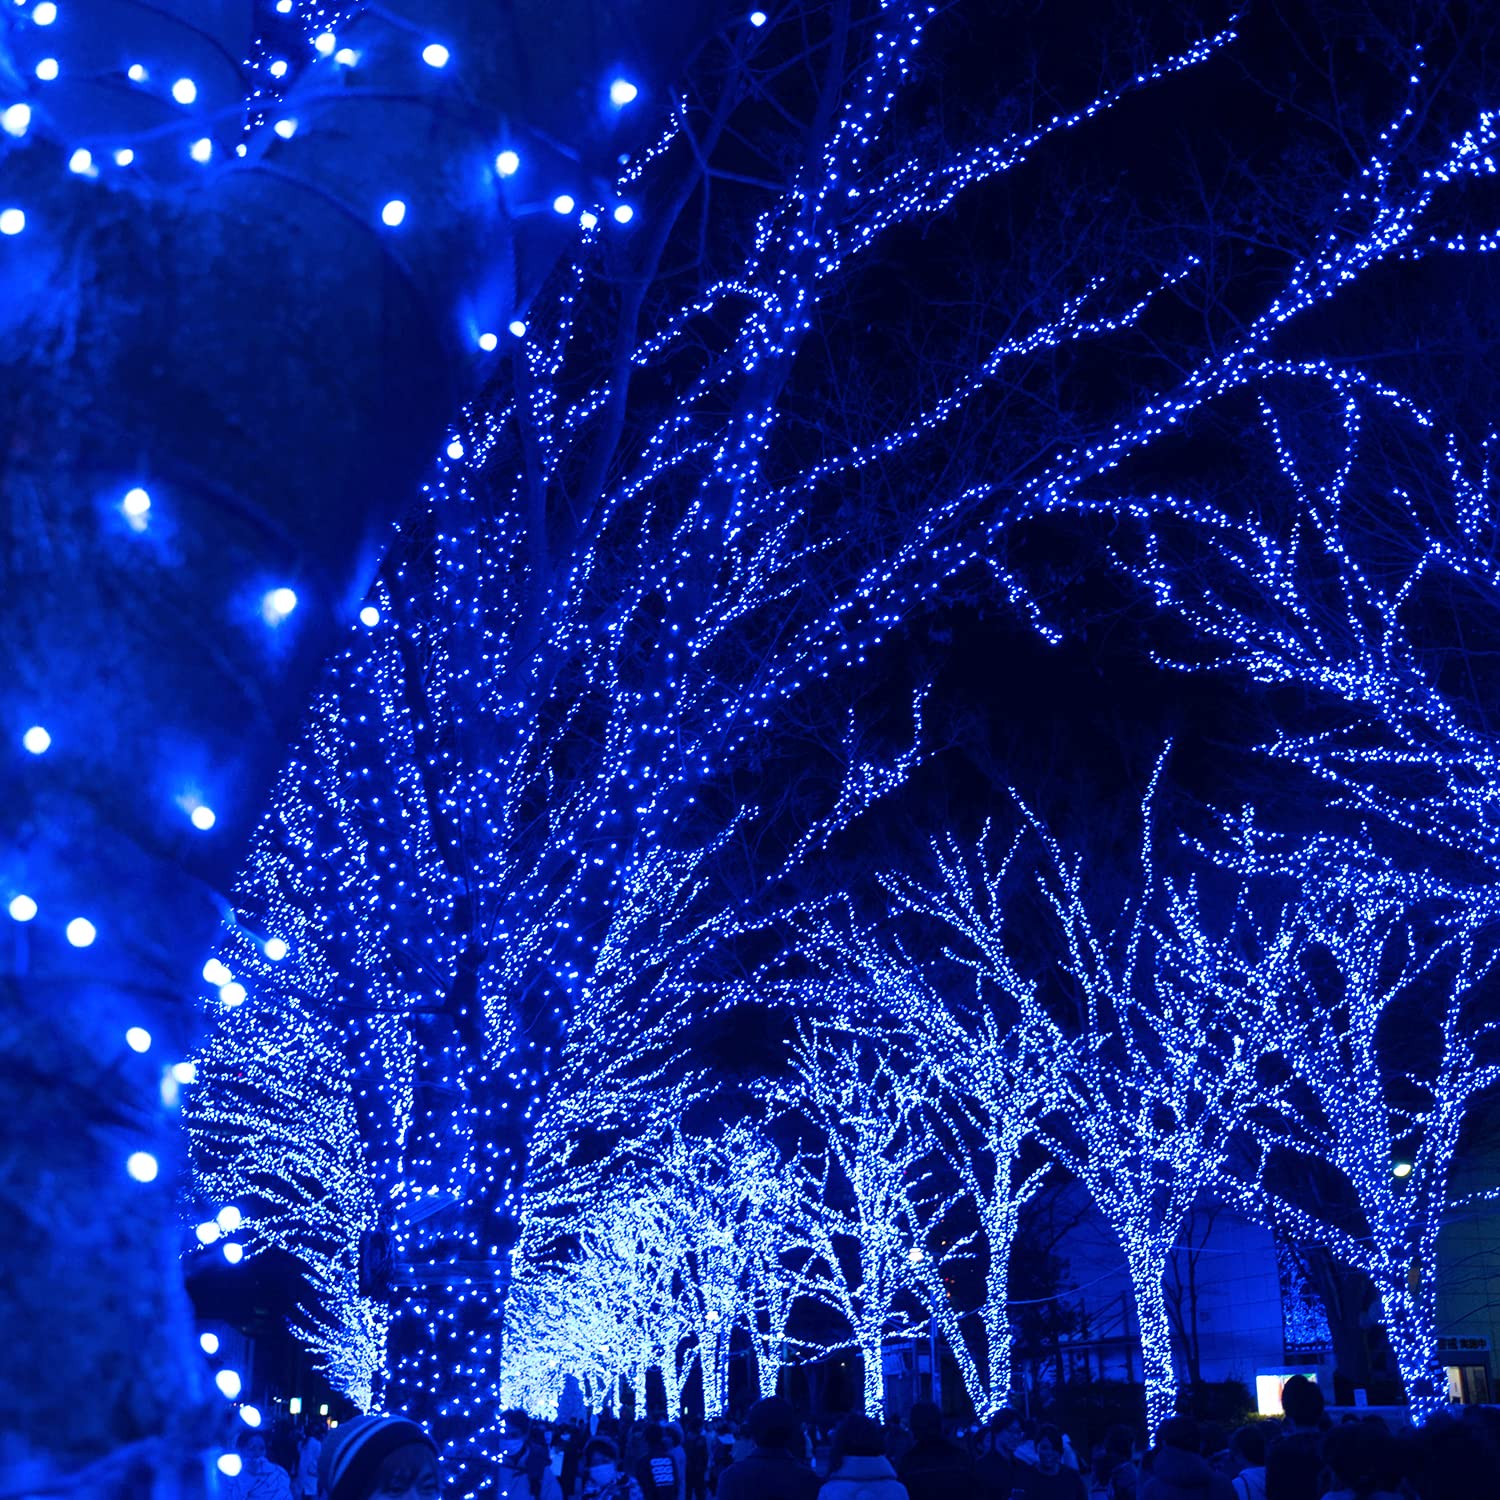 Rirool Solar Christmas Lights Outdoor Waterproof - 100 LED 39ft Blue String Lights with 8 Modes for Garden Party Tree Halloween Decorations - image 4 of 9